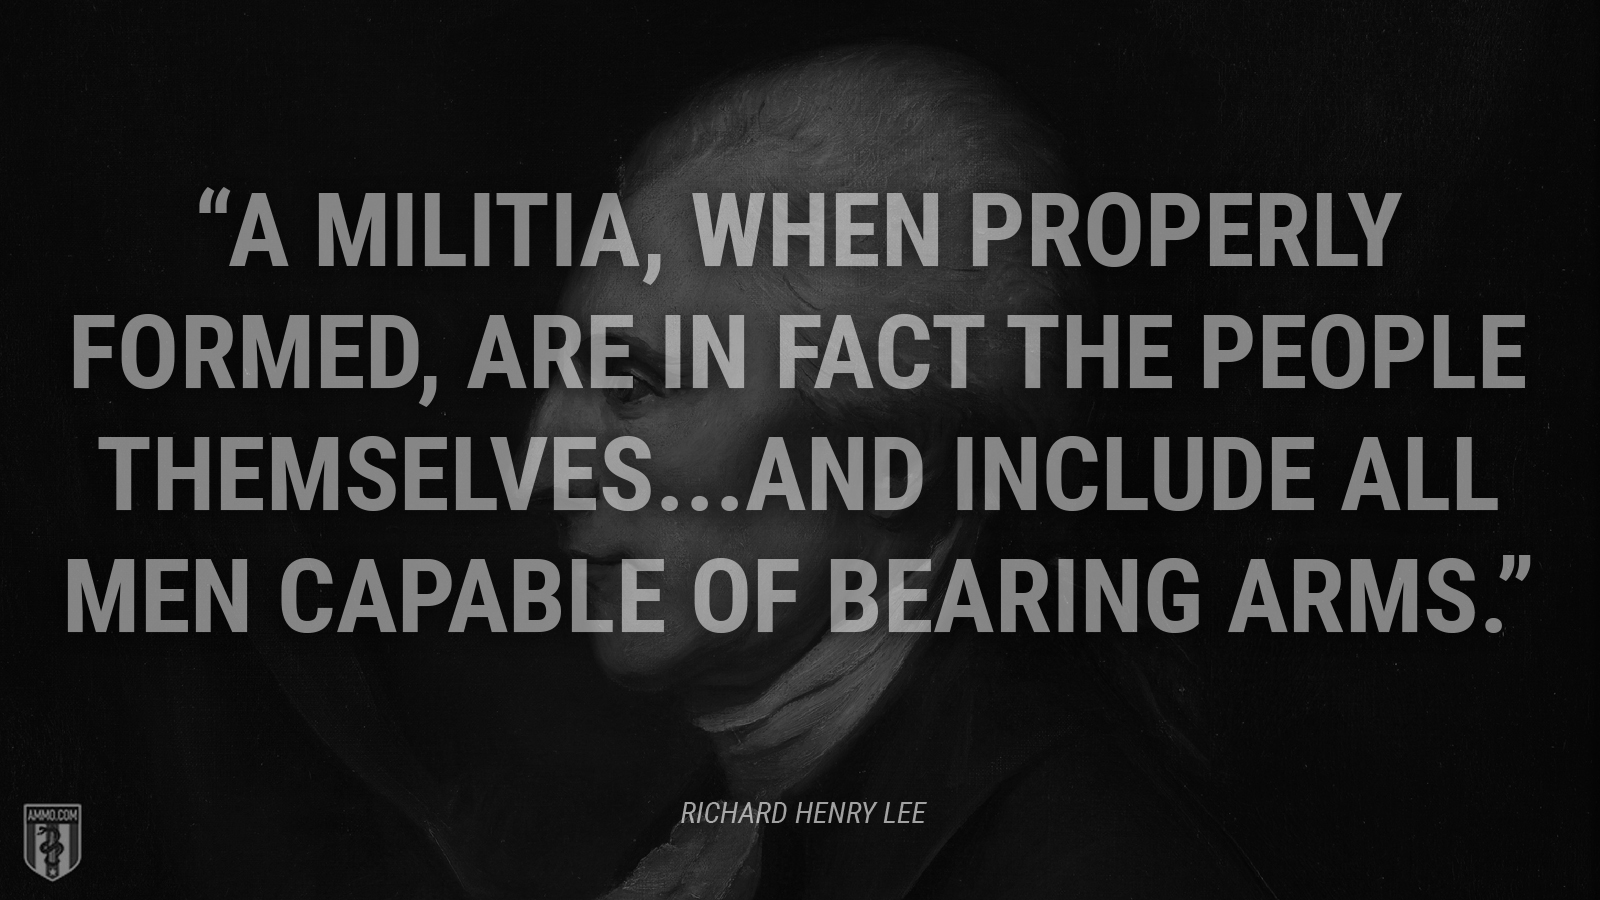 “A militia, when properly formed, are in fact the people themselves...and include all men capable of bearing arms.” - Richard Henry Lee